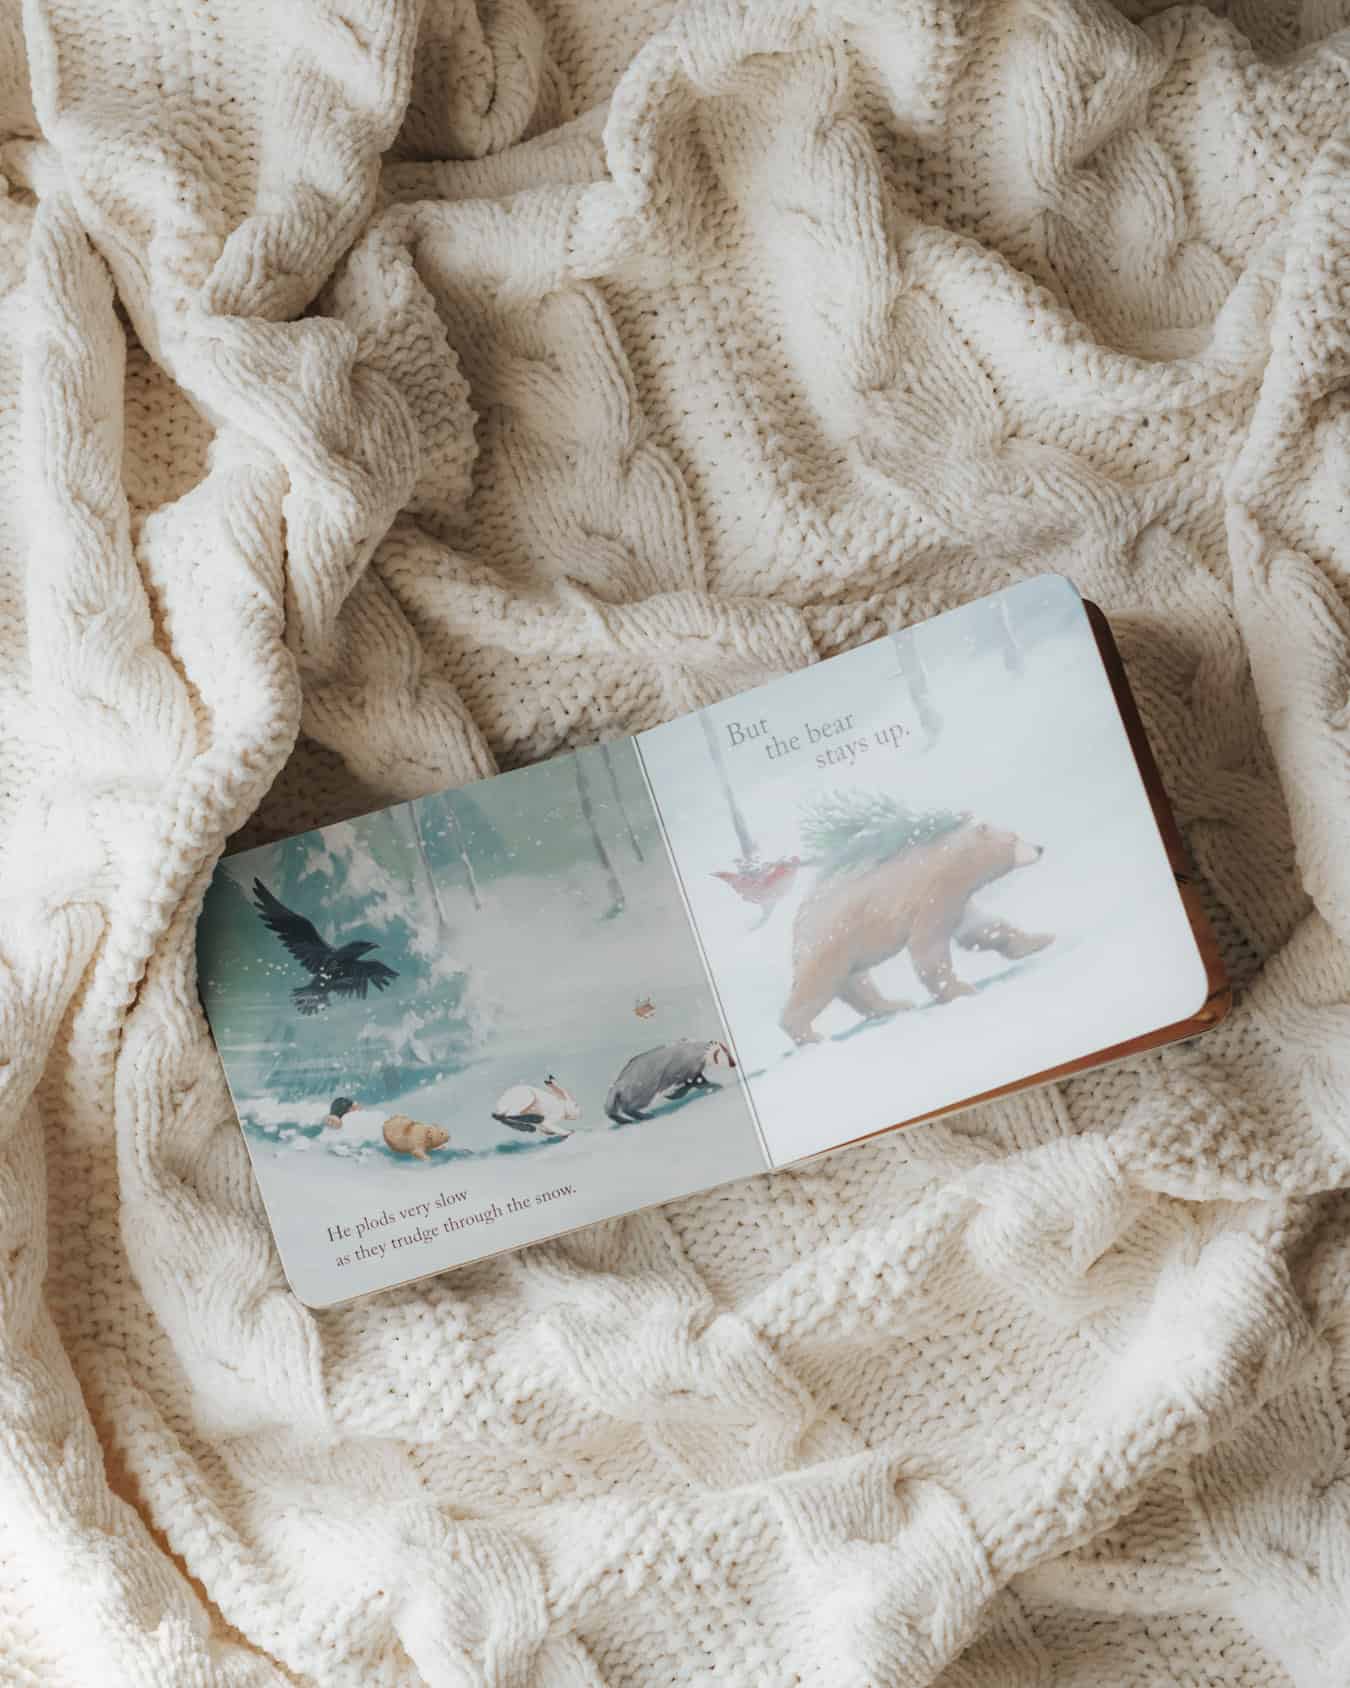 A book, Bear Stays Up for Christmas, on a cream-colored blanket.